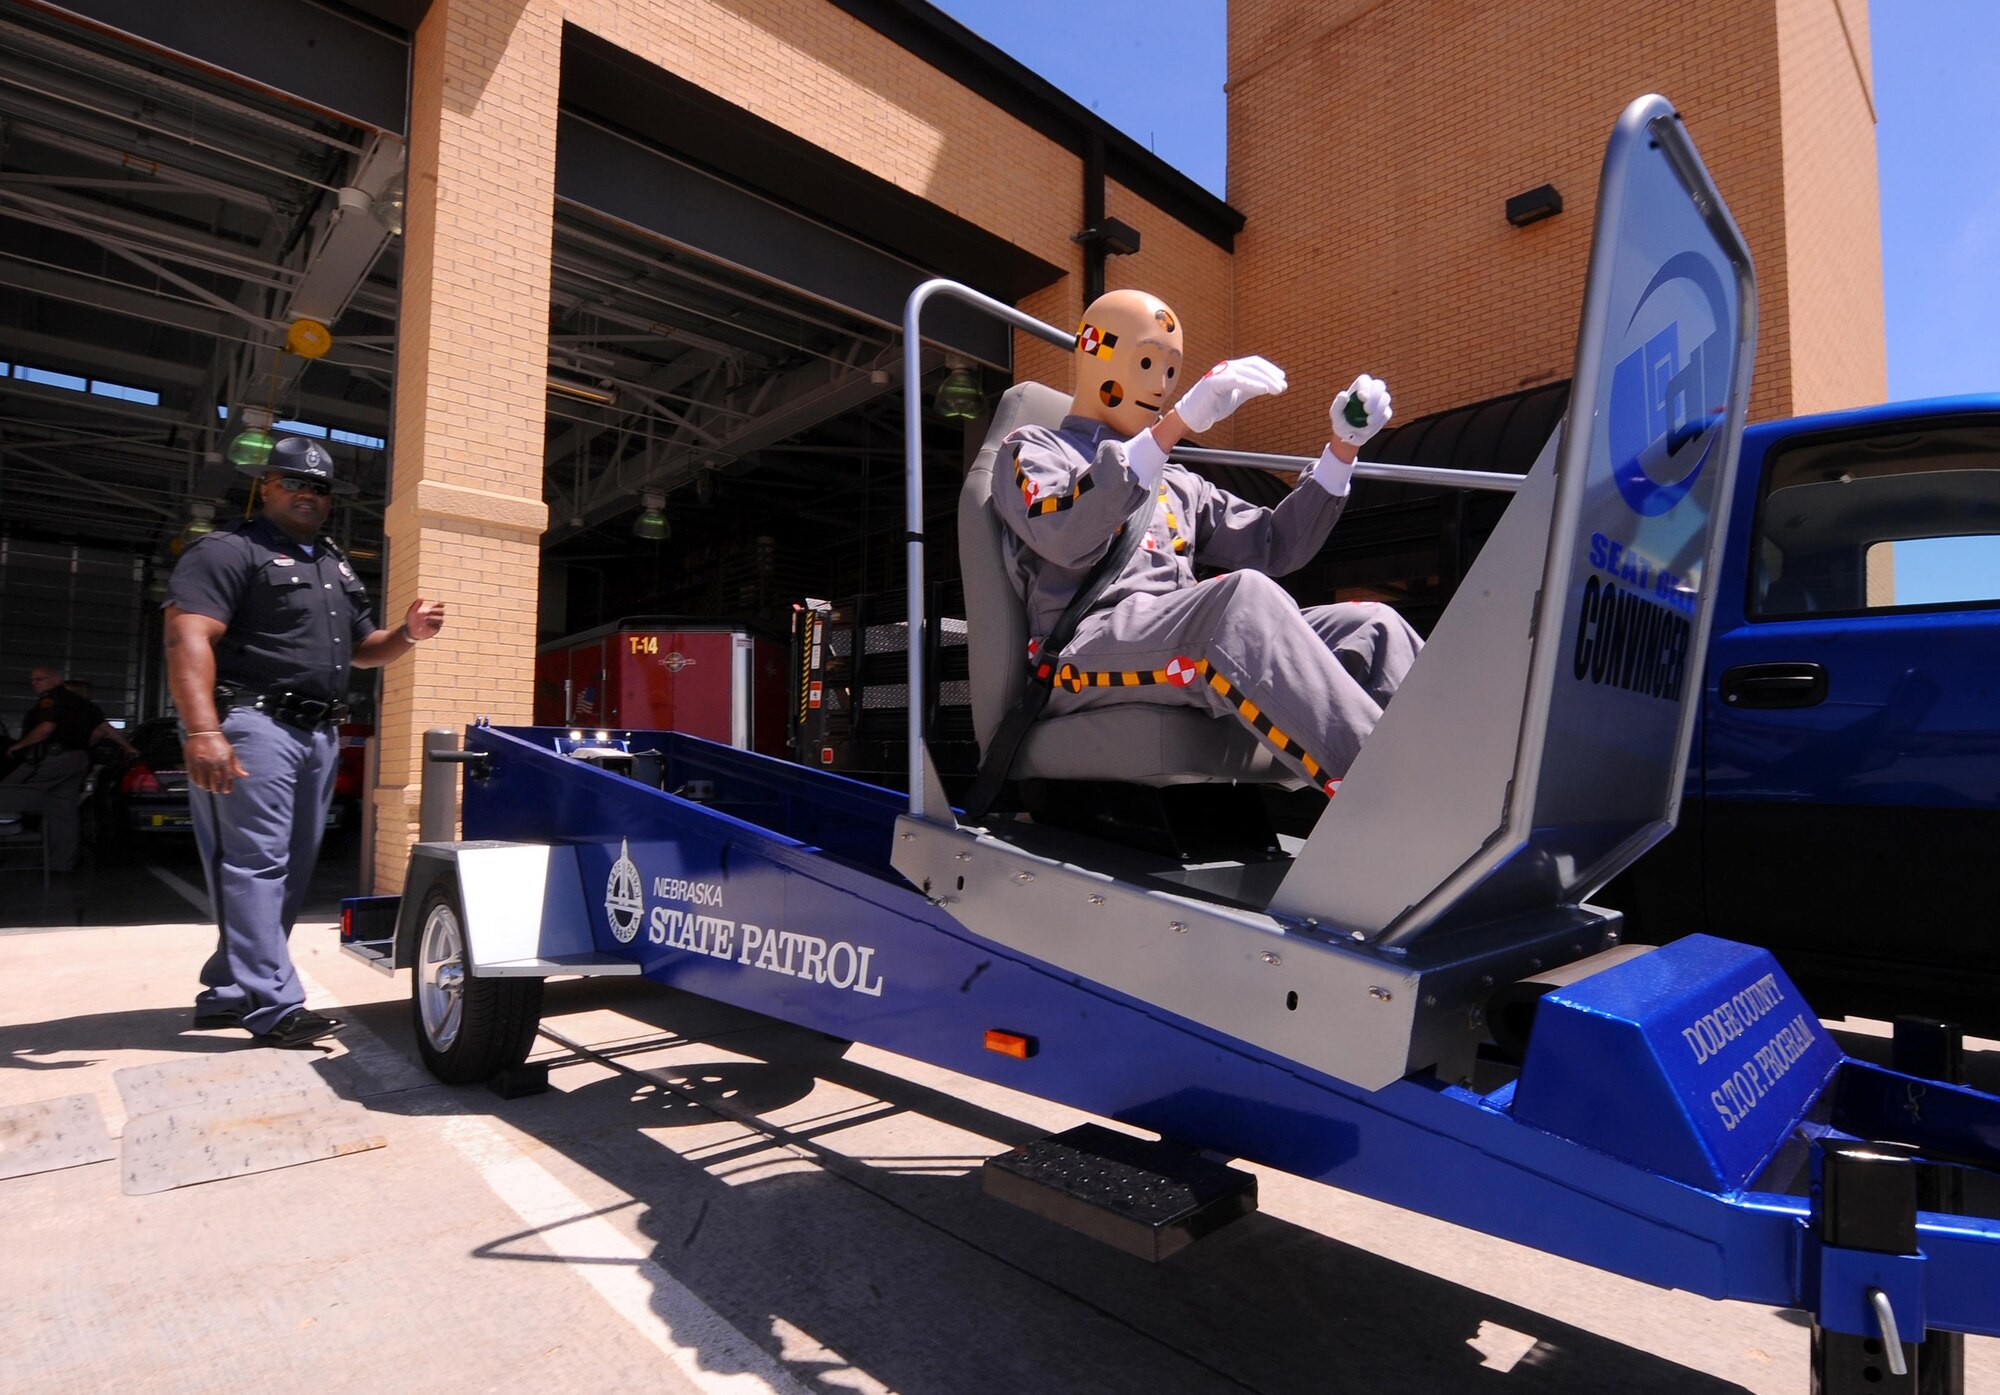 A Nebraska State Trooper uses a training aid to demonstrate the importance of seatbelts and child-restraints, even at relatively slow speeds, as part of a previous 55th Wing Safety Day. In addition to the typical booths manned by safety-conscious organizations like local energy providers, law enforcement agencies and non-profits, this event will include a motorcycle awareness demonstration, face-painting and balloons, military working dog demonstrations and an up-close look at the Omaha police department’s helicopter, ABLE 1. Food trucks will also be on-site to provide dining options for attendees.
